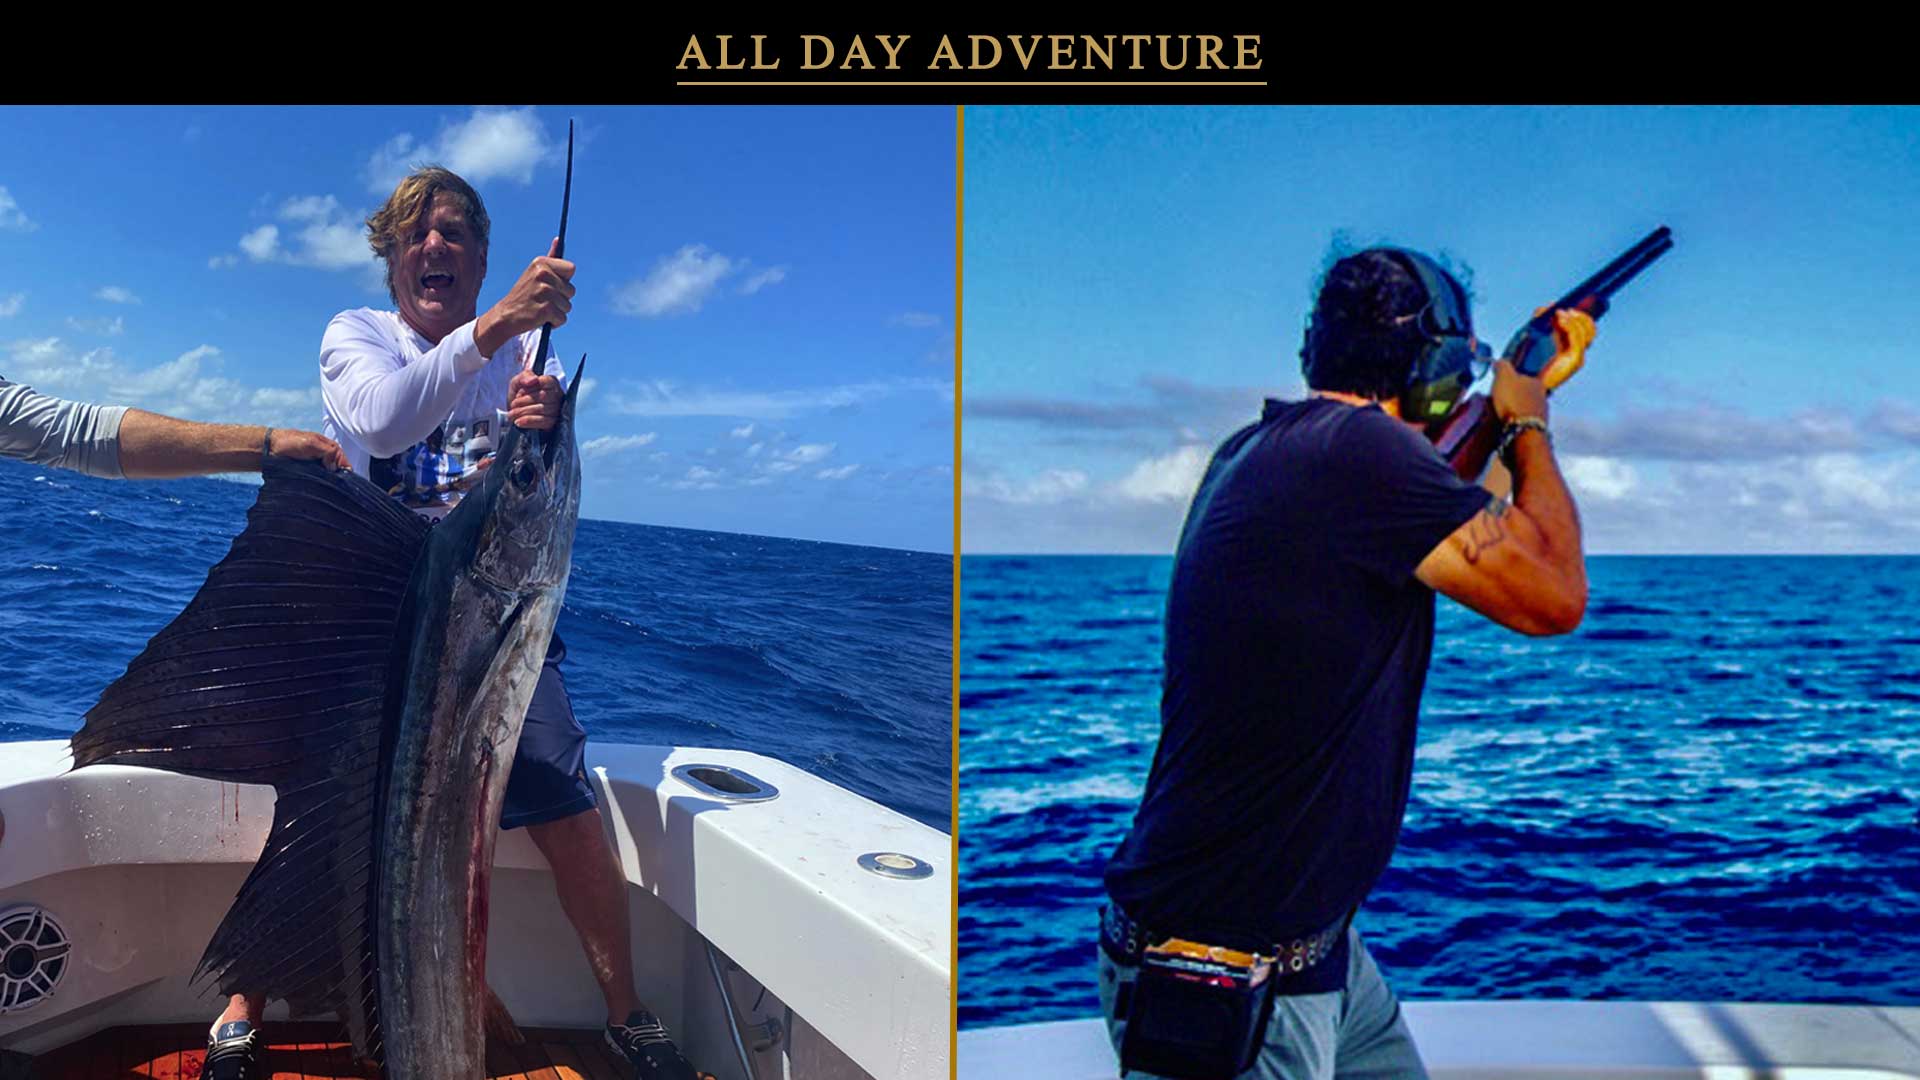 Come Play All Day! Big Game Saltwater Fishing, Ocean Skeet Shooting, Miami DJ Dance Party & BBQ, Jetskis. Private Charters. Only at SALT Luxury Miami